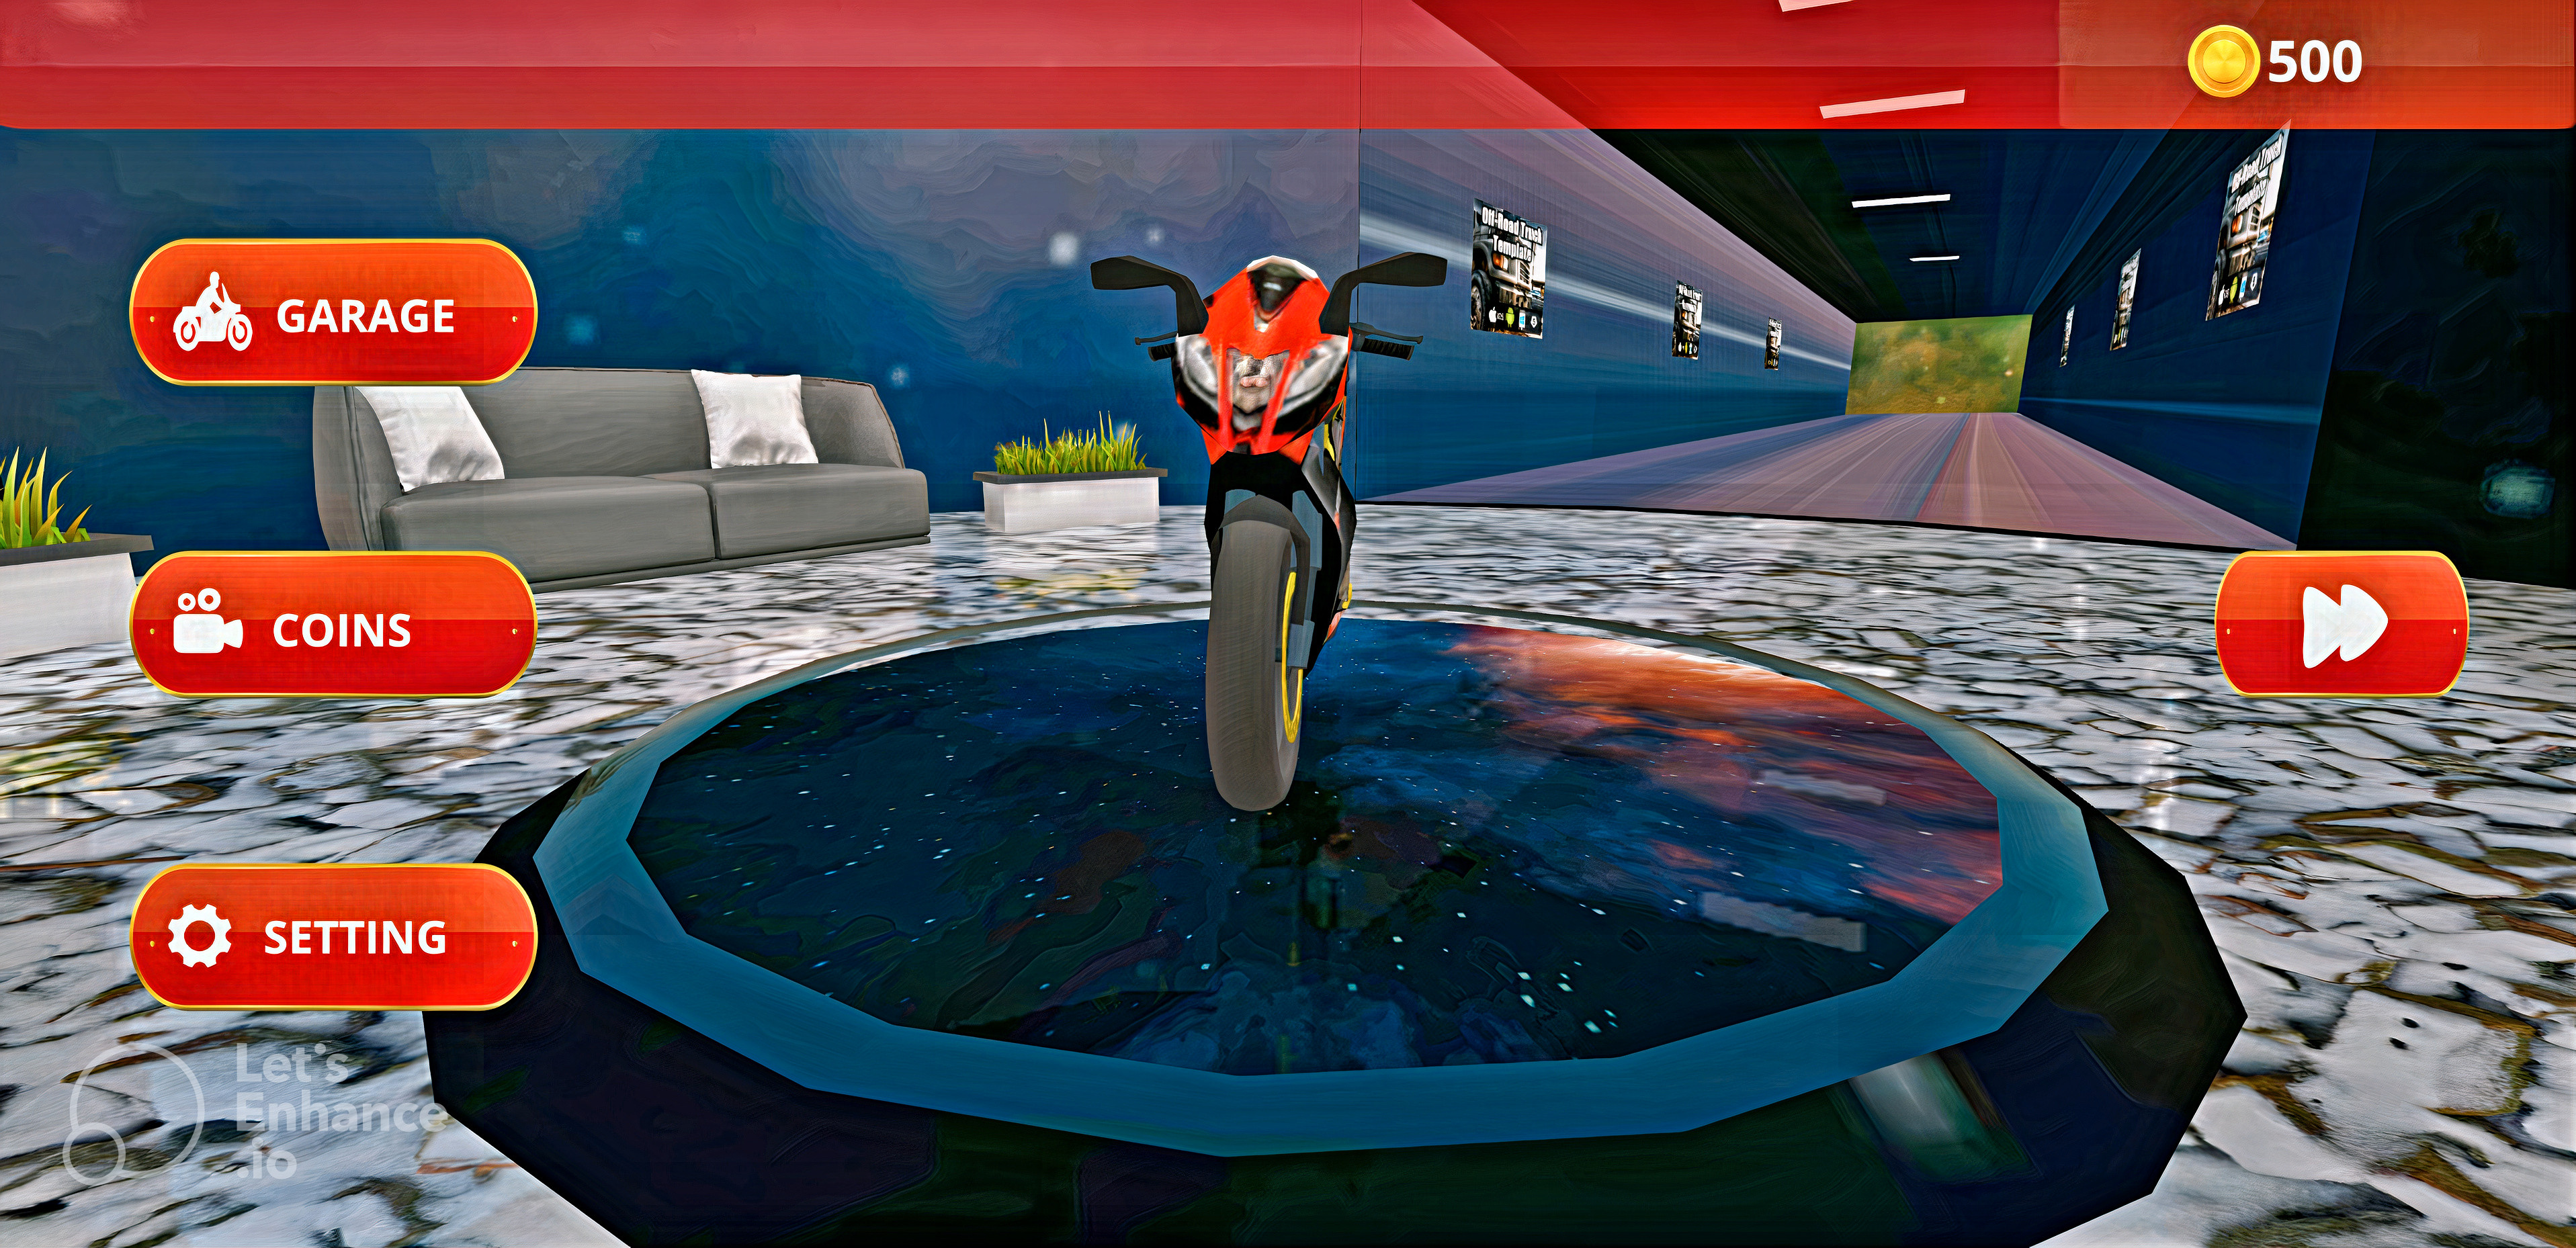 New Mobile Game "Motor Intent" Takes Players on an Adrenaline-Fueled Ride through Busy City Traffic